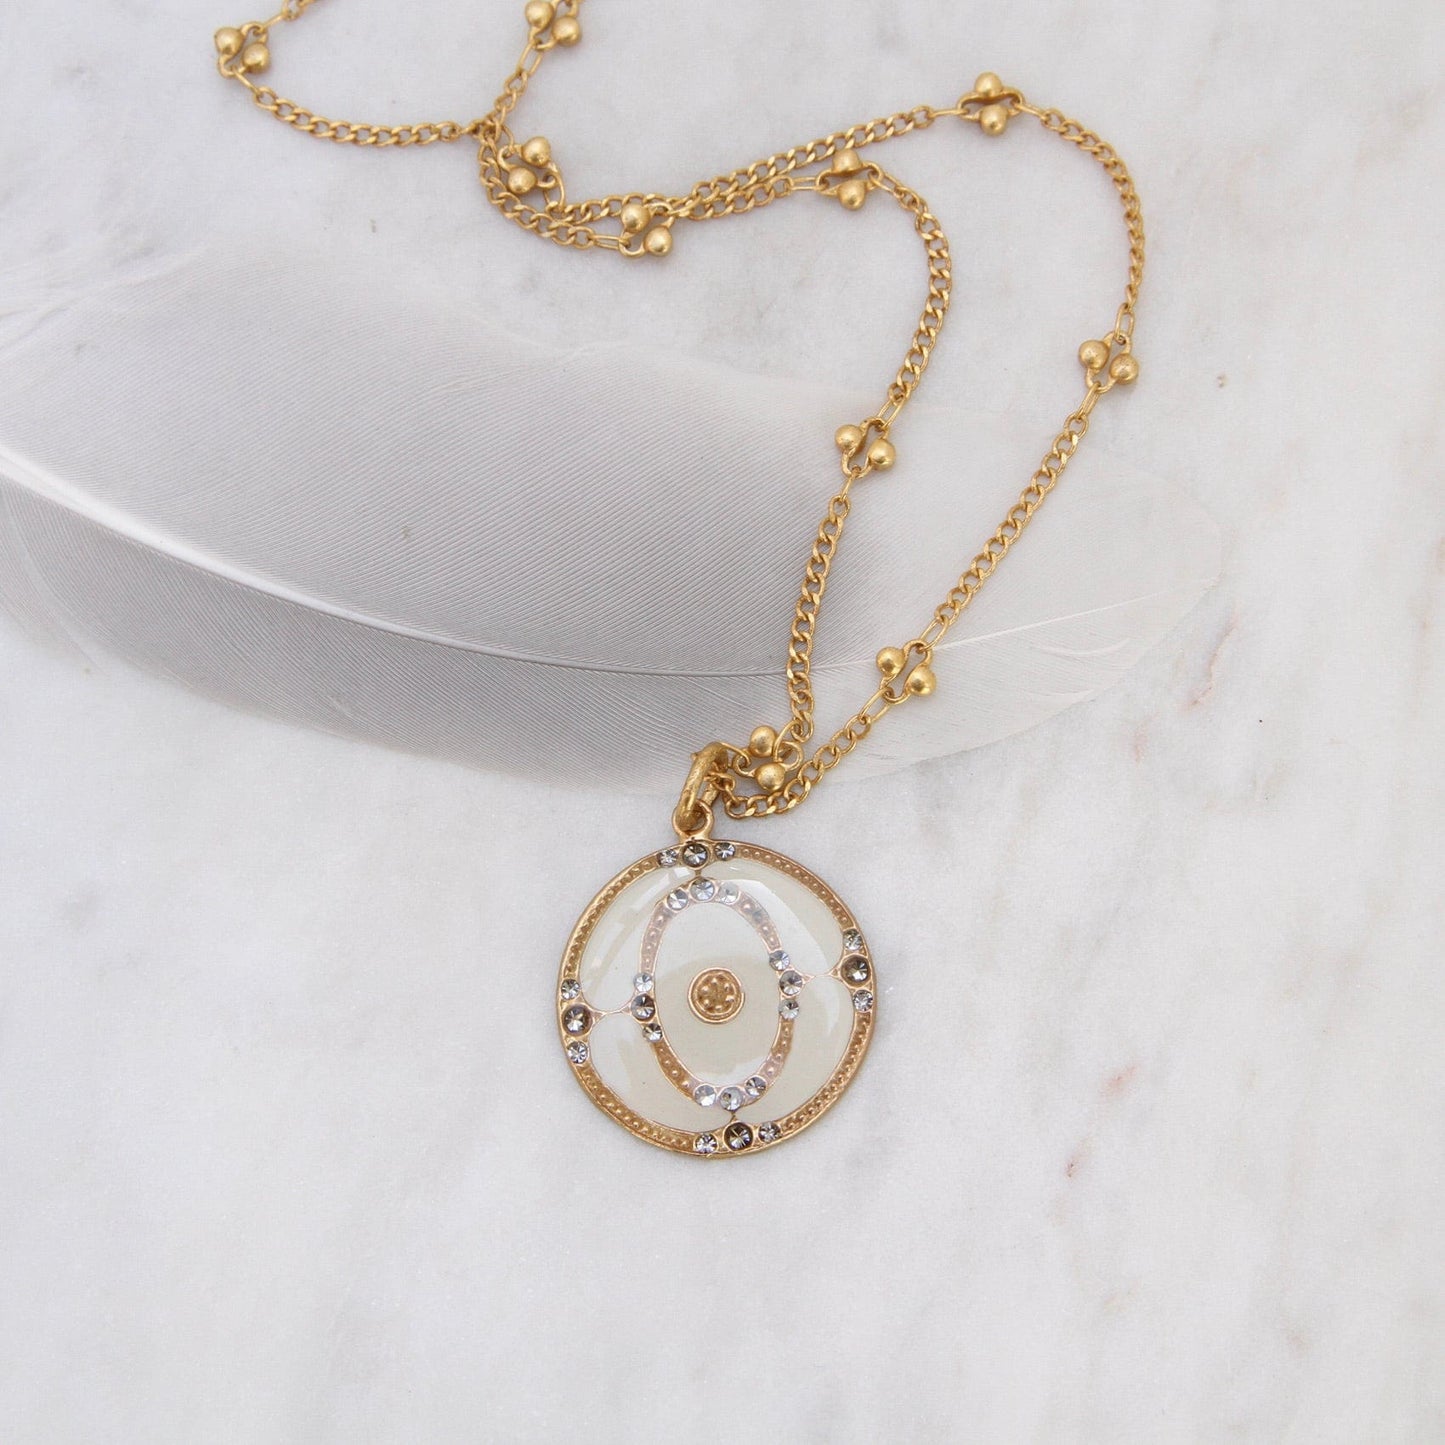 Load image into Gallery viewer, NKL-JM White Enamel Medallion Pendant with Crystals  on Chain
